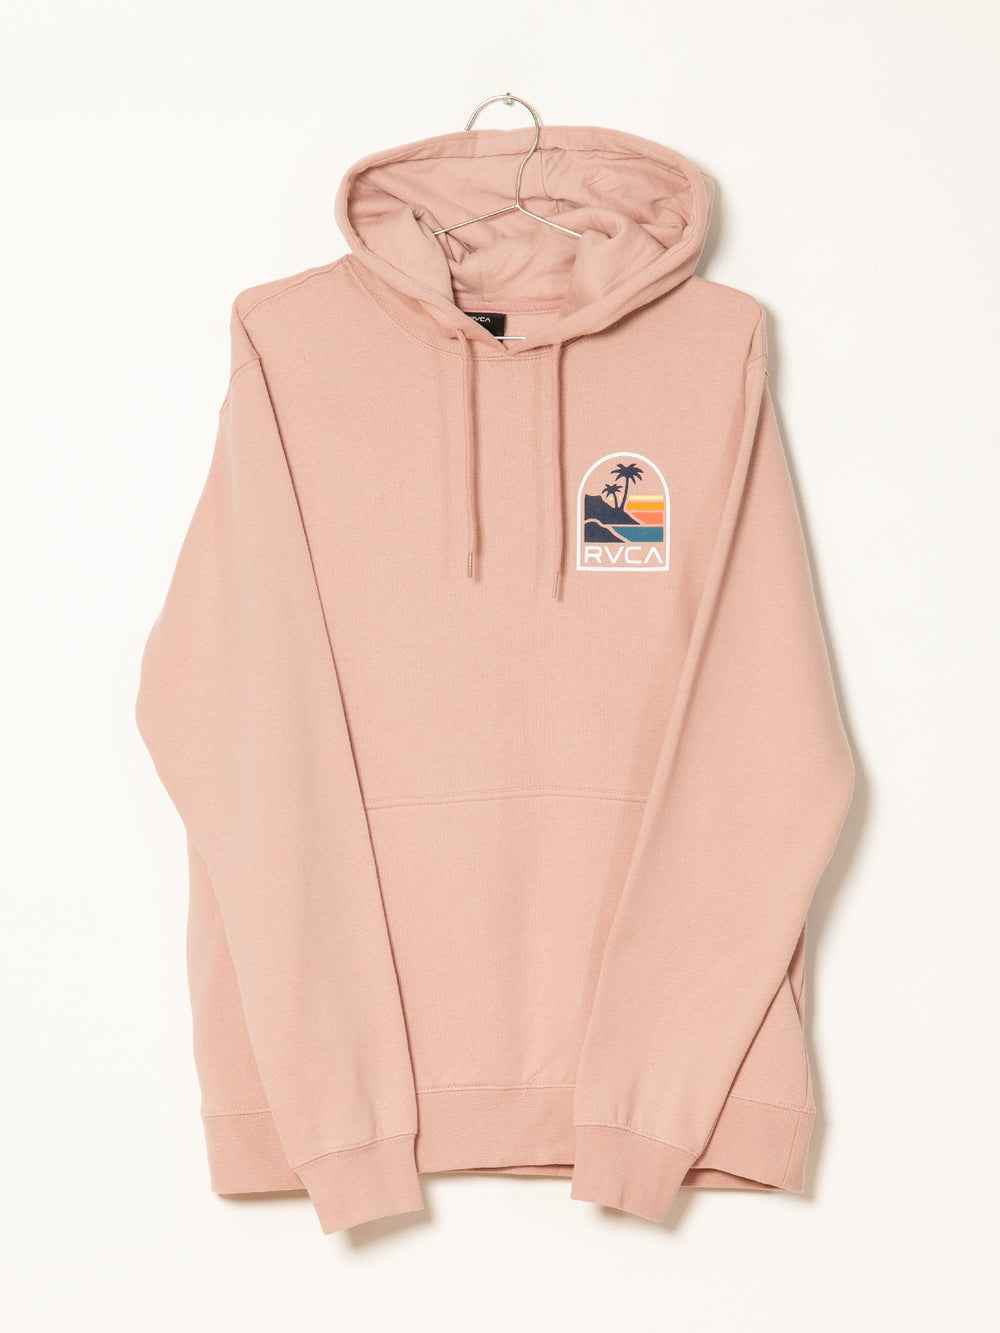 RVCA VISTA PULL OVER HOODIE - CLEARANCE